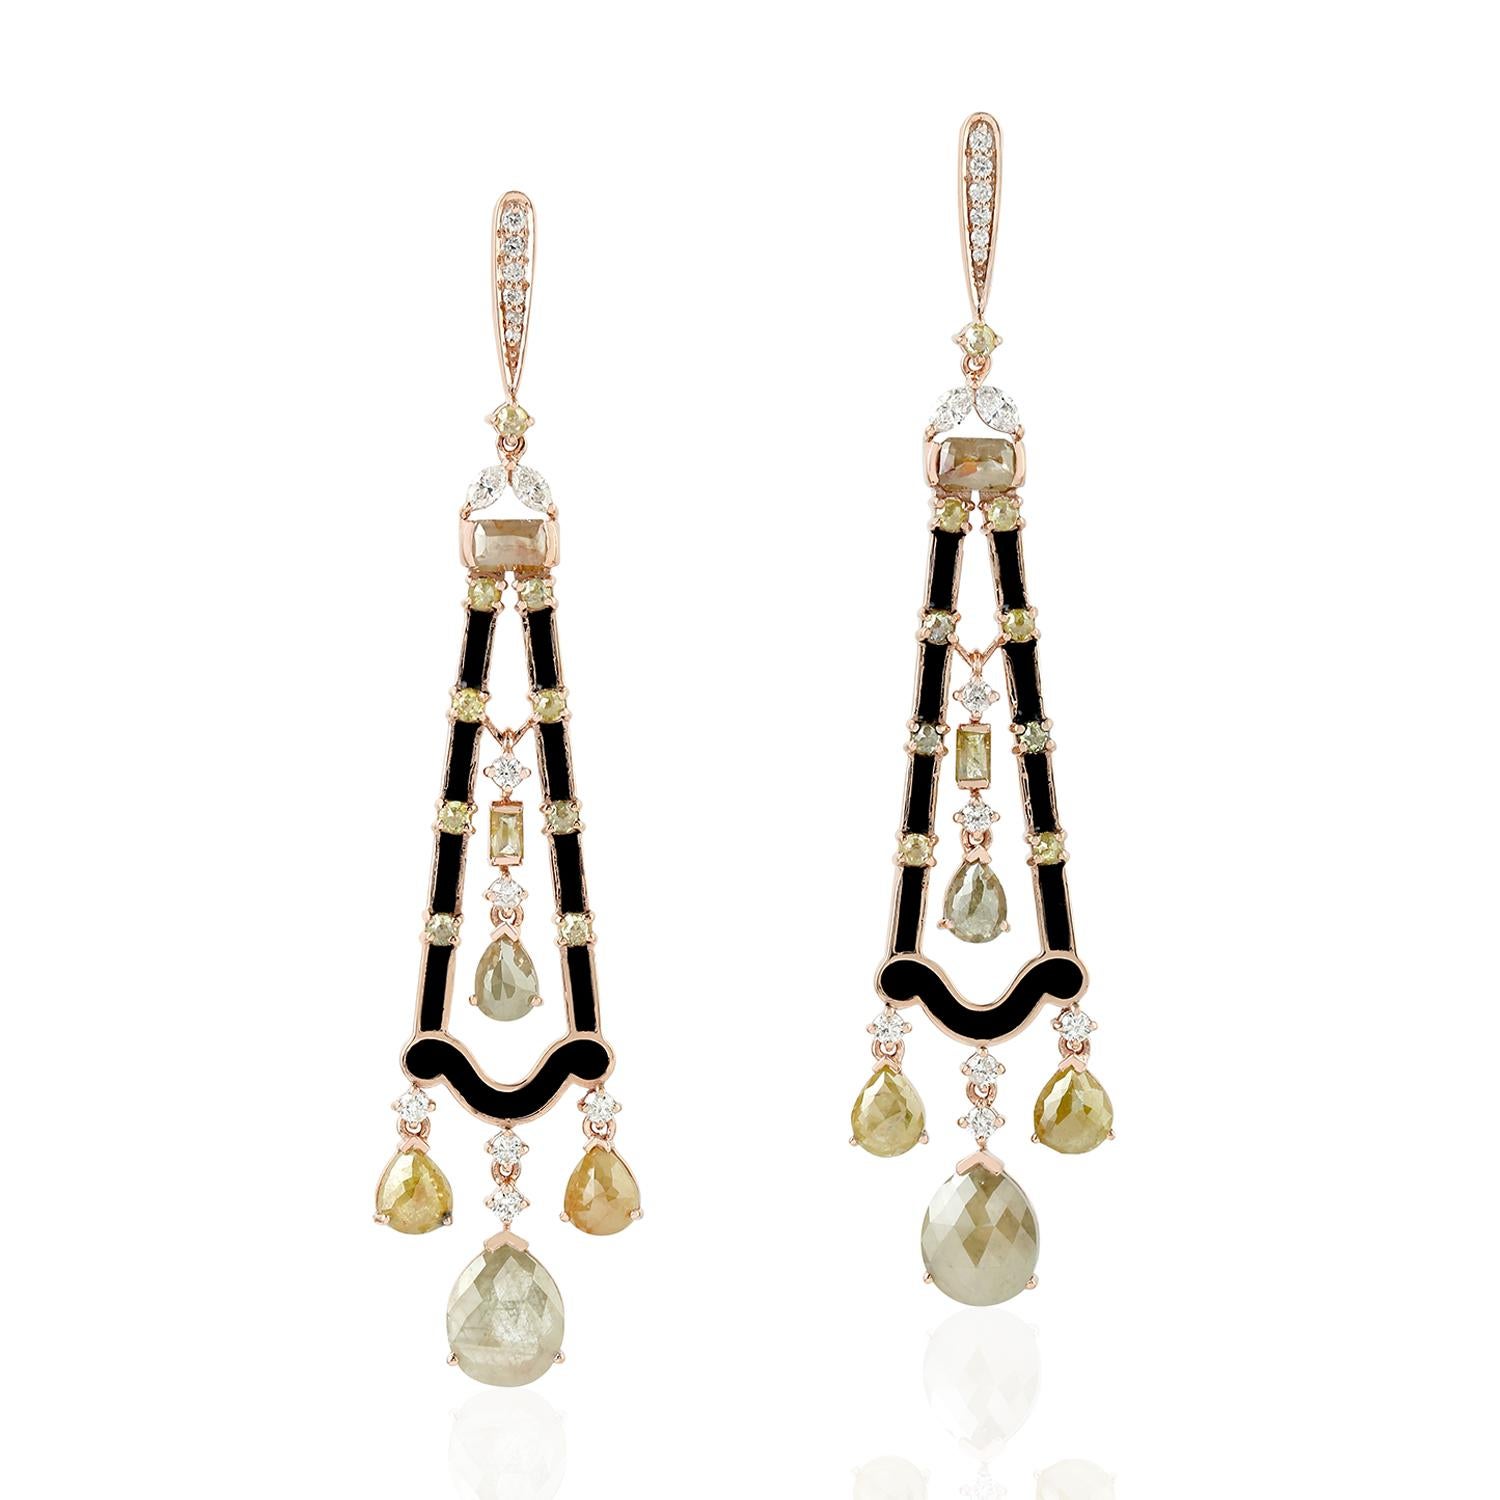 Modern Eclectic Looking White and Brown Diamond and Enamel Earrings in 18K Gold In New Condition For Sale In New York, NY